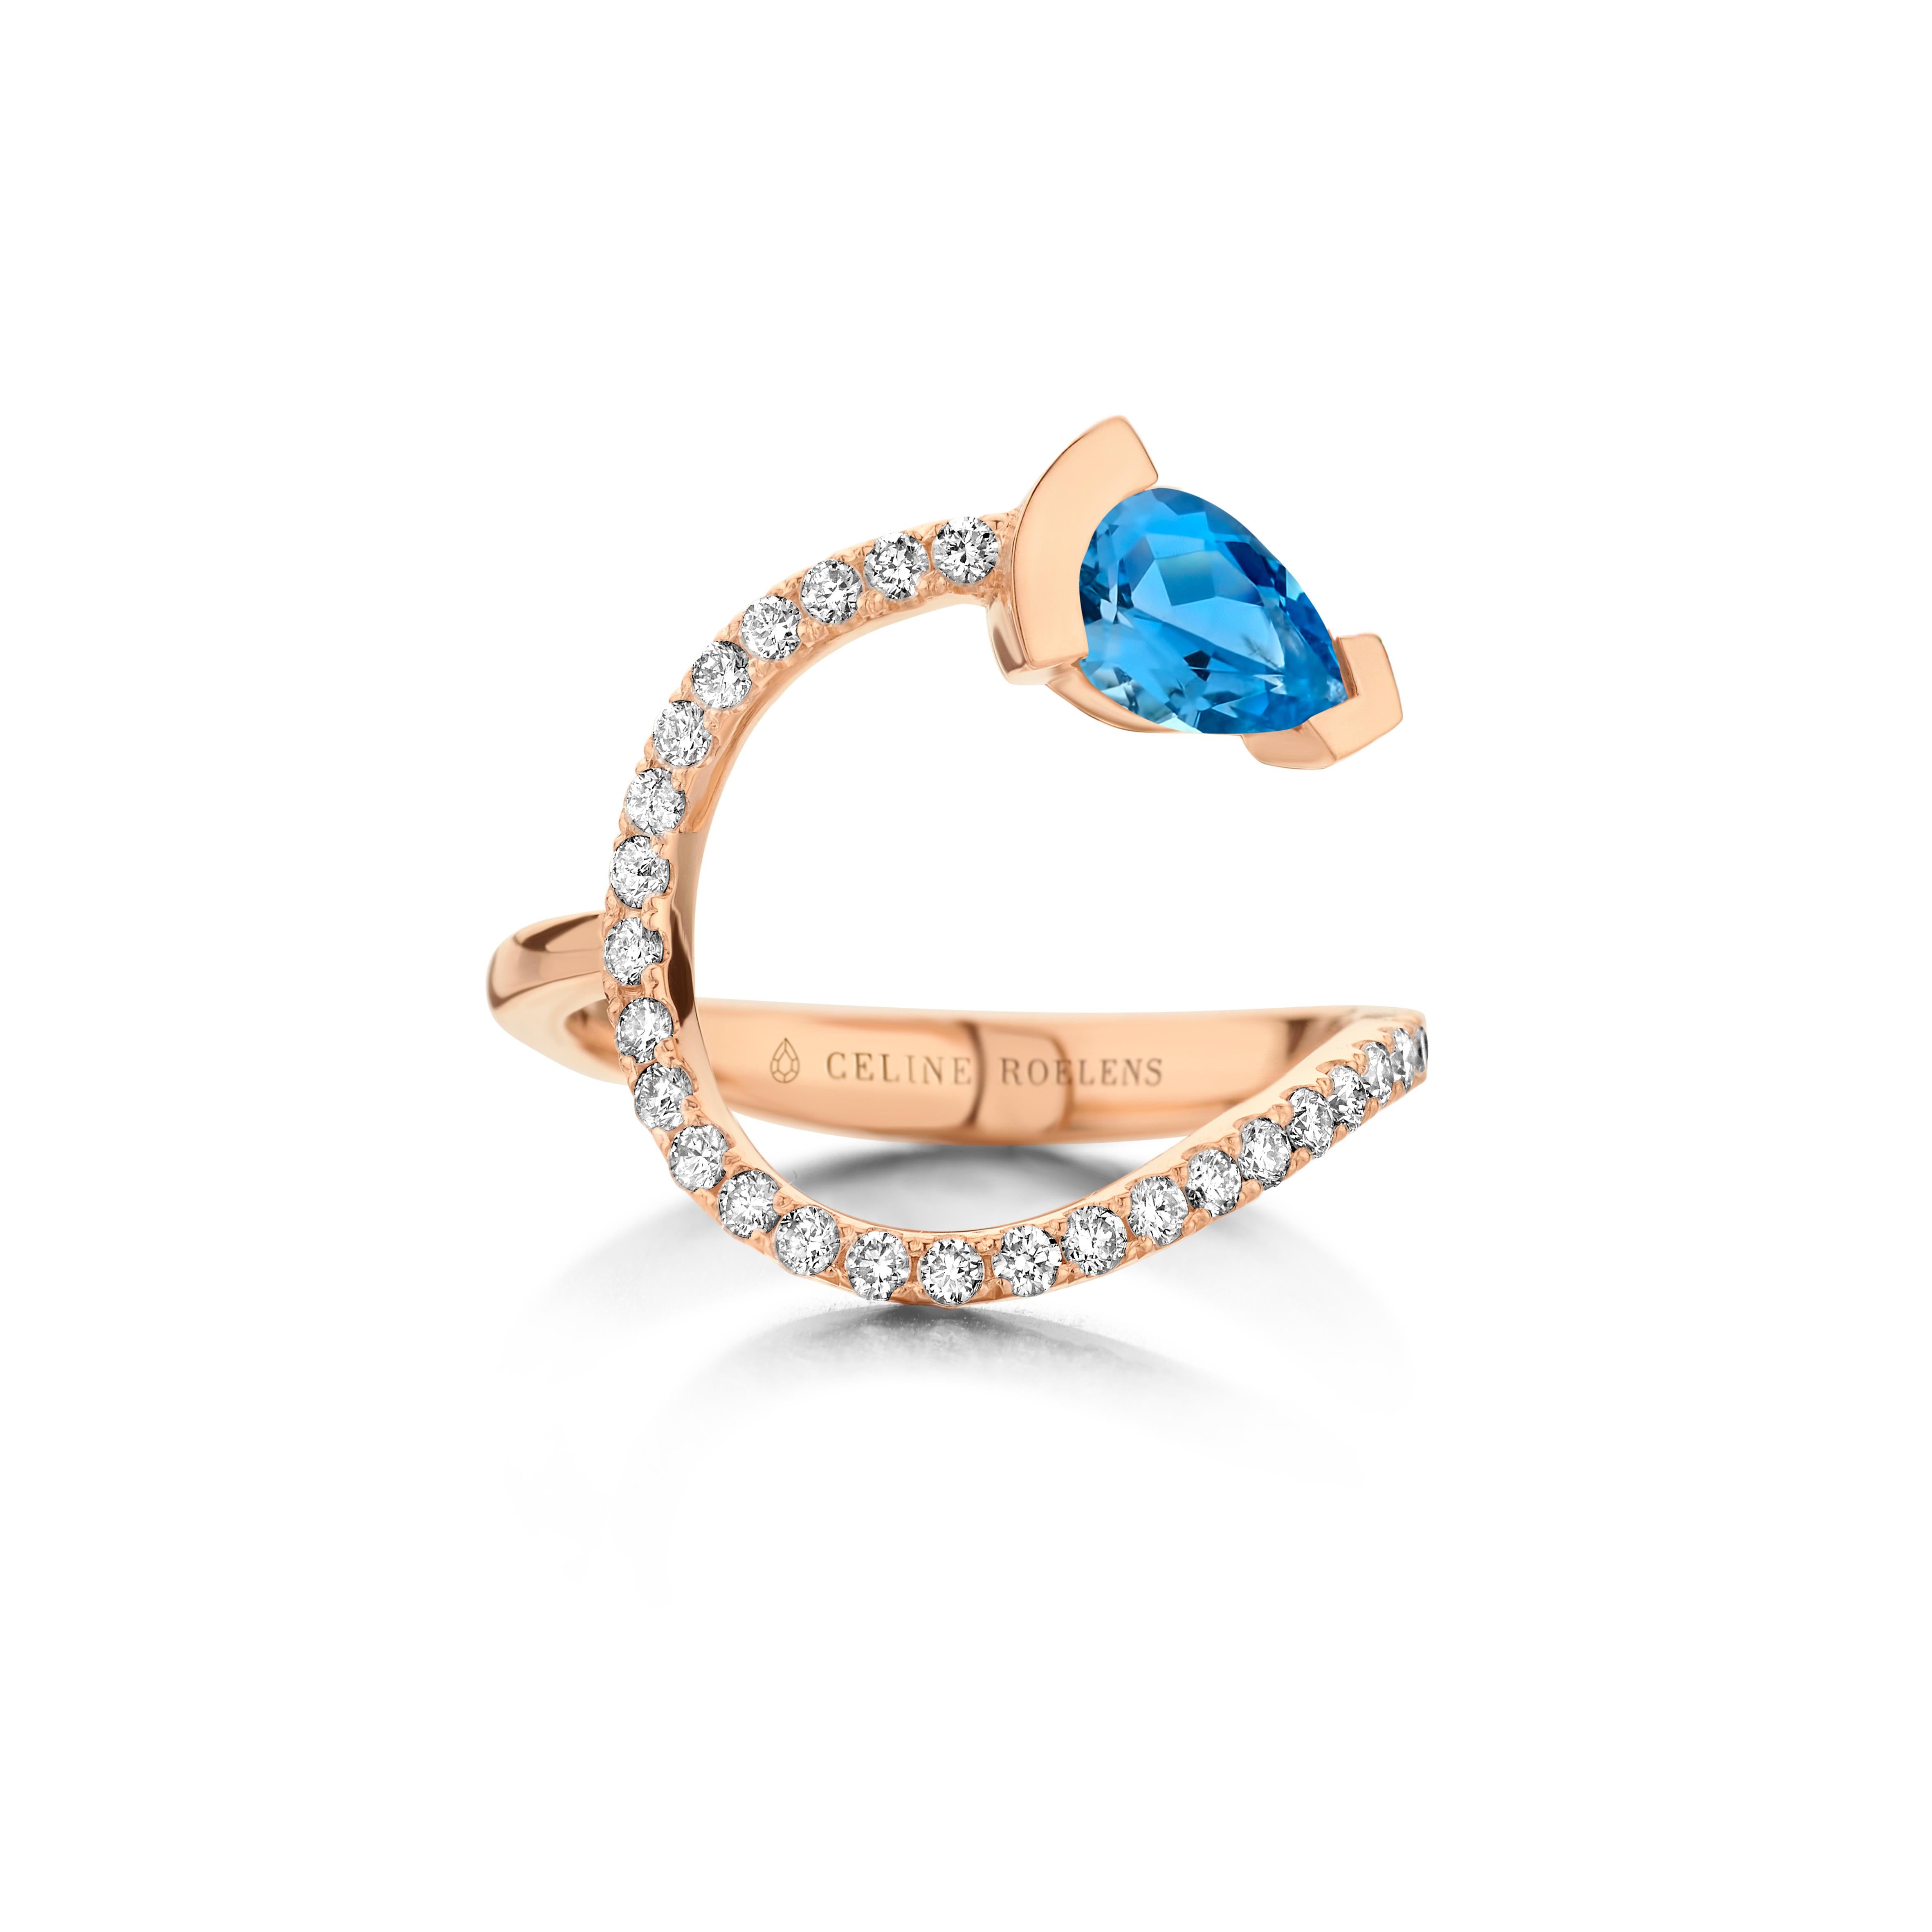 ADELINE curved ring in 18Kt yellow gold set with a pear shaped Santa Maria aquamarine and 0,33 Ct of white brilliant cut diamonds - VS F quality.